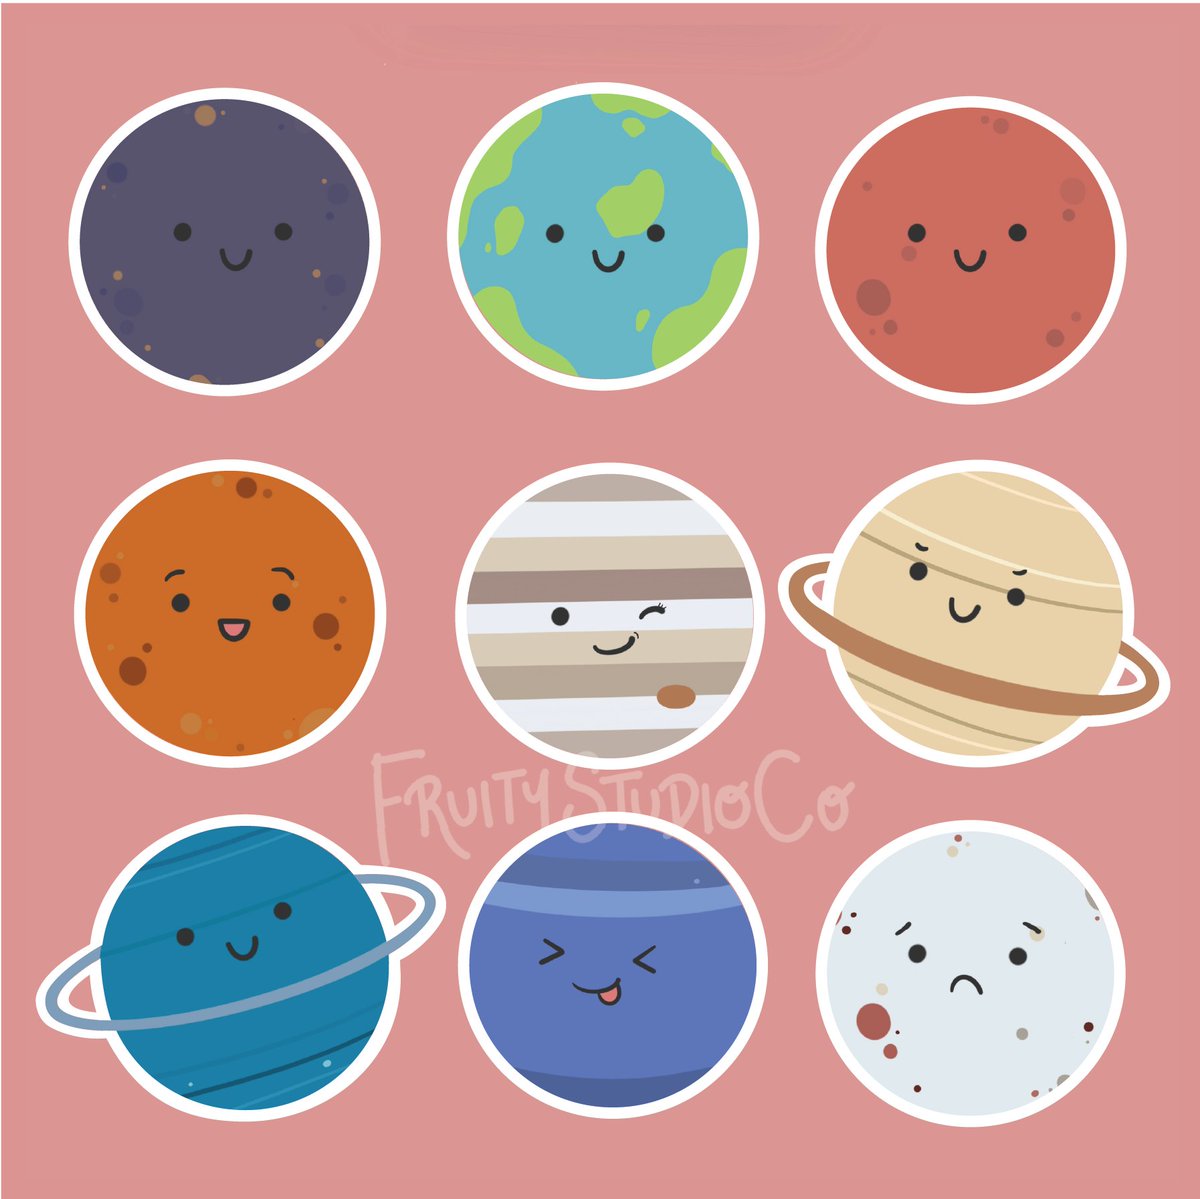 Hi, we're Crystal & Candy and we make kawaii stickers! We've been friends since high school and decided to open up a sticker store together Shop:  http://www.fruitystudioco.com 